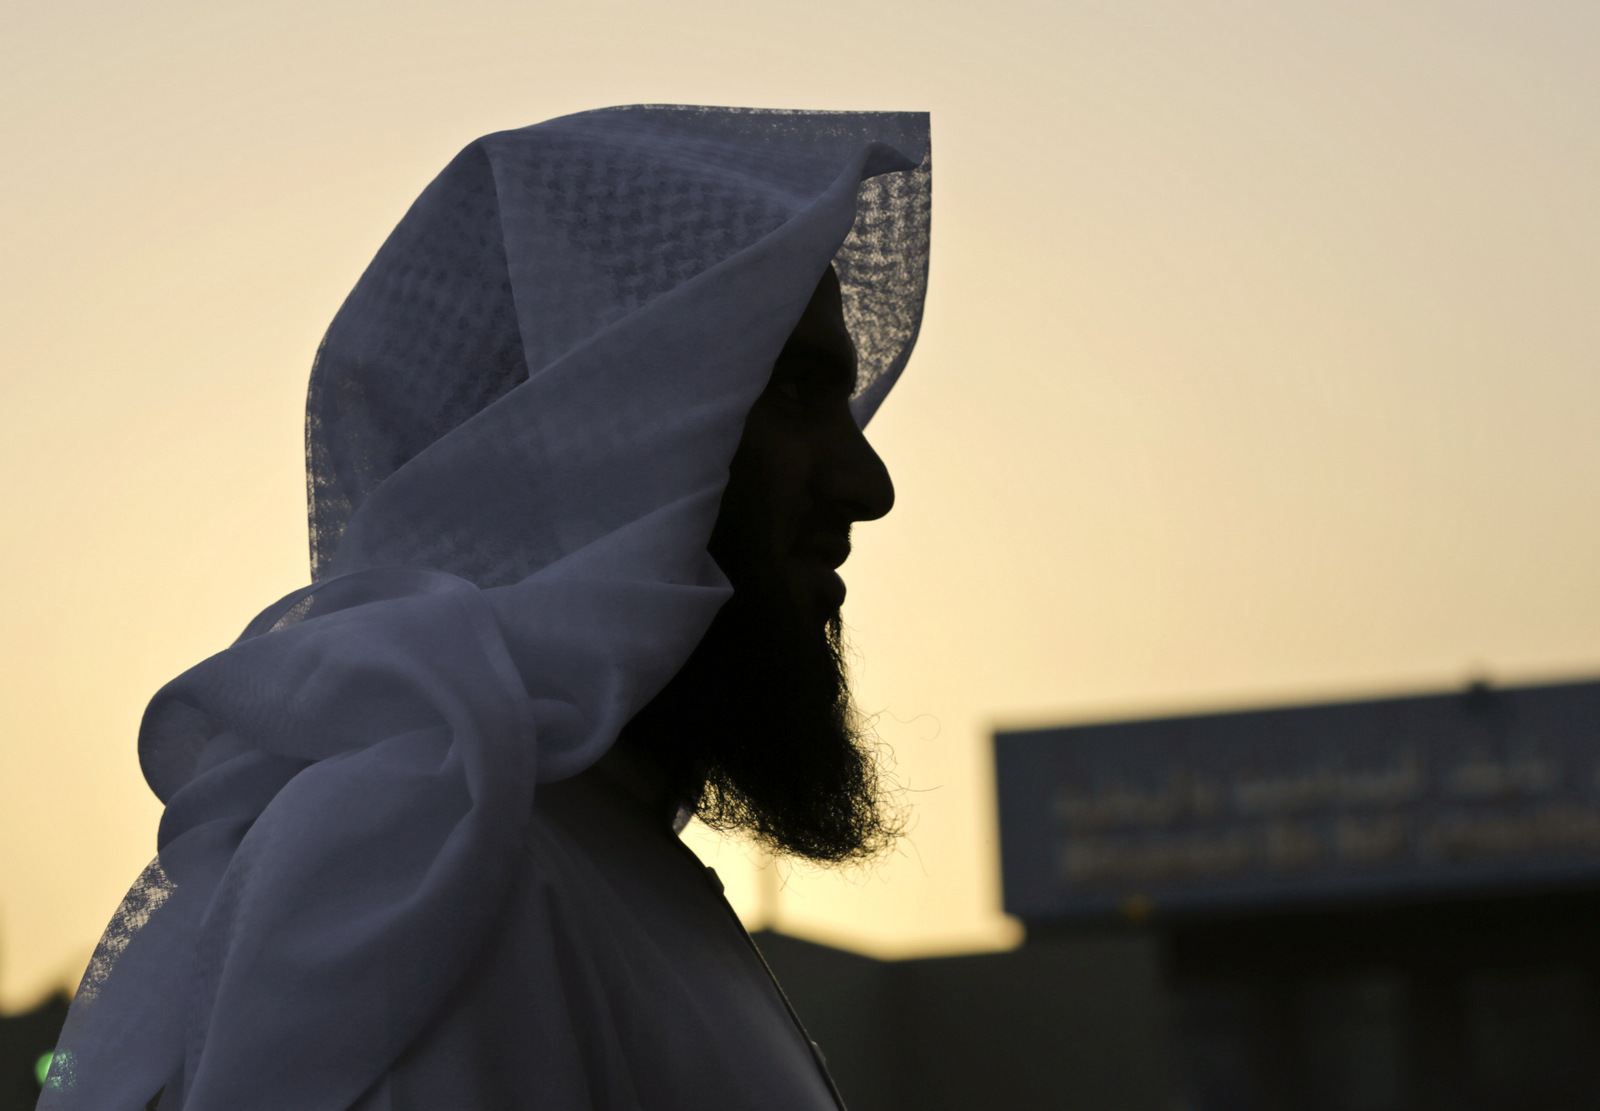 Former Saudi militant, 30-year-old Badr al-Enezi, stands in the courtyard of the Mohammed bin Nayef Center for Advice, Counseling and Care, a rehab center which aims to reform militants in Riyadh, Saudi Arabia. (AP/Hasan Jamali)